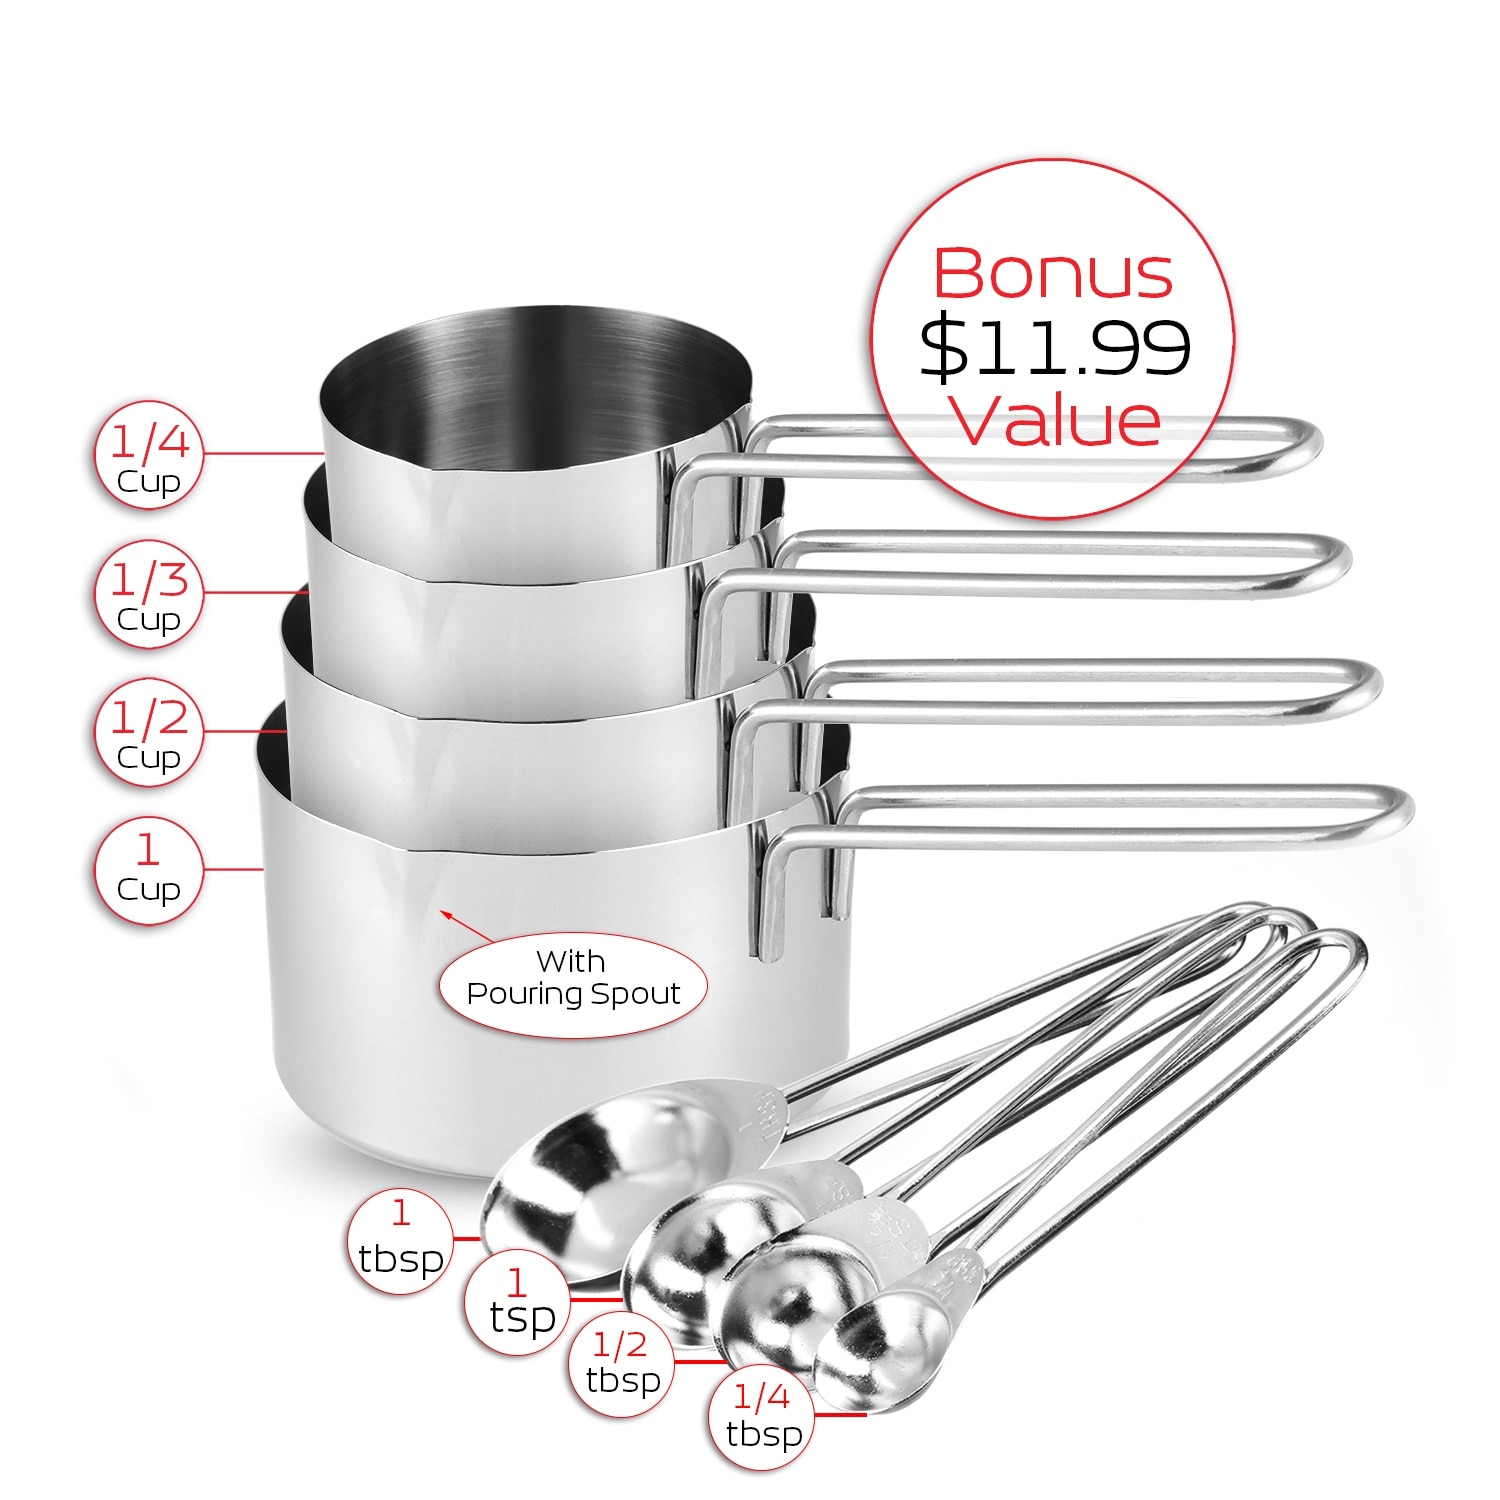 https://ak1.ostkcdn.com/images/products/is/images/direct/78f2b7d7ee852125f95bdf47d14c9871004fd3fd/Joytable-Premium-Stainless-Steel-Mixing-Bowl%2C-Measuring-Cups%2C-and-Spoon-Set.jpg